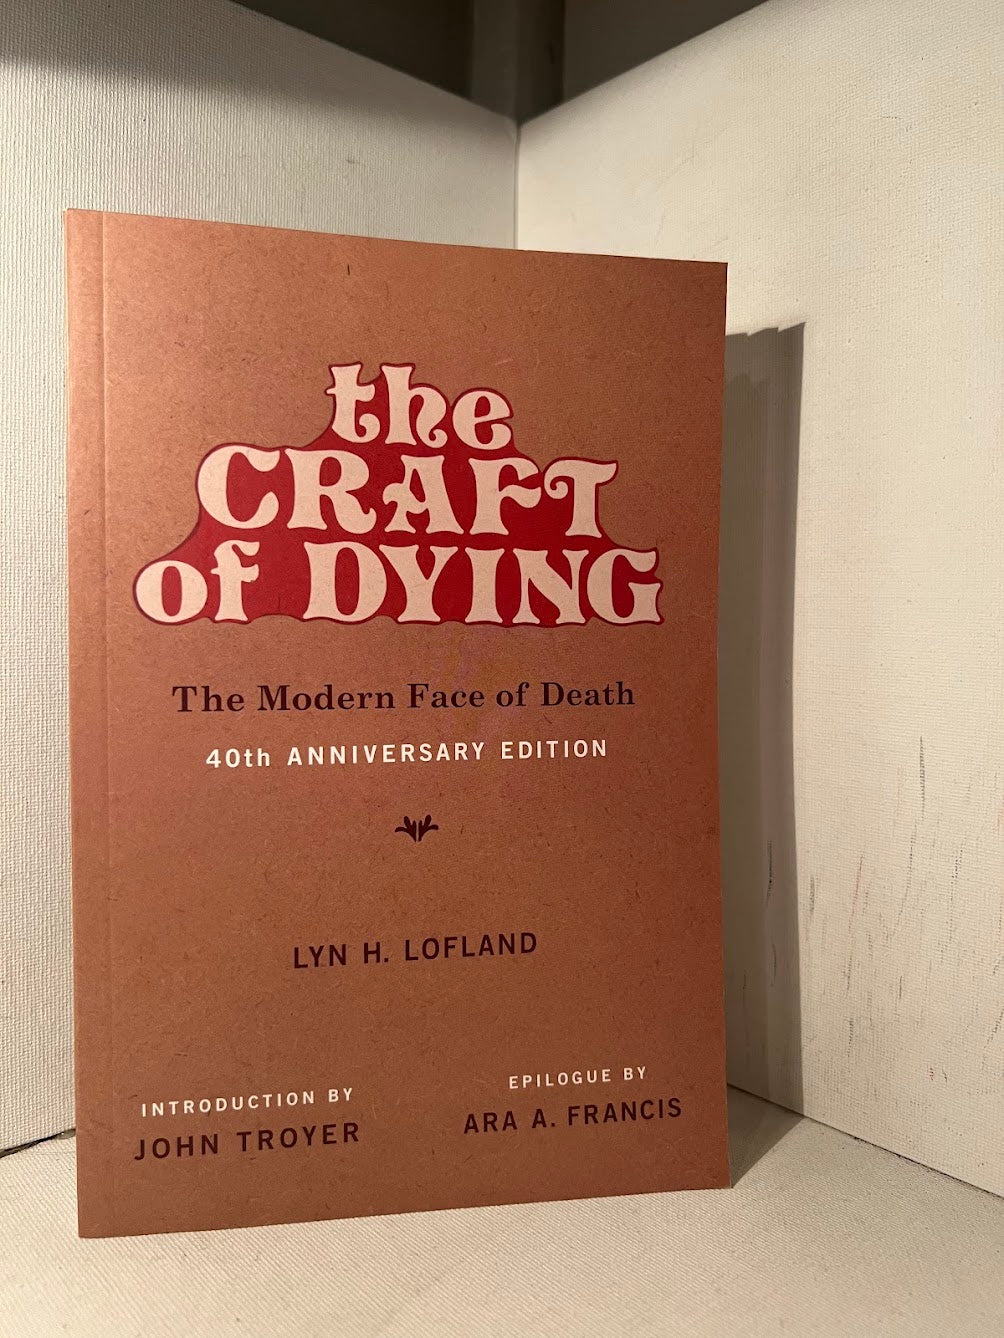 The Craft of Dying - The Modern Face of Death by Lyn H. Lofland